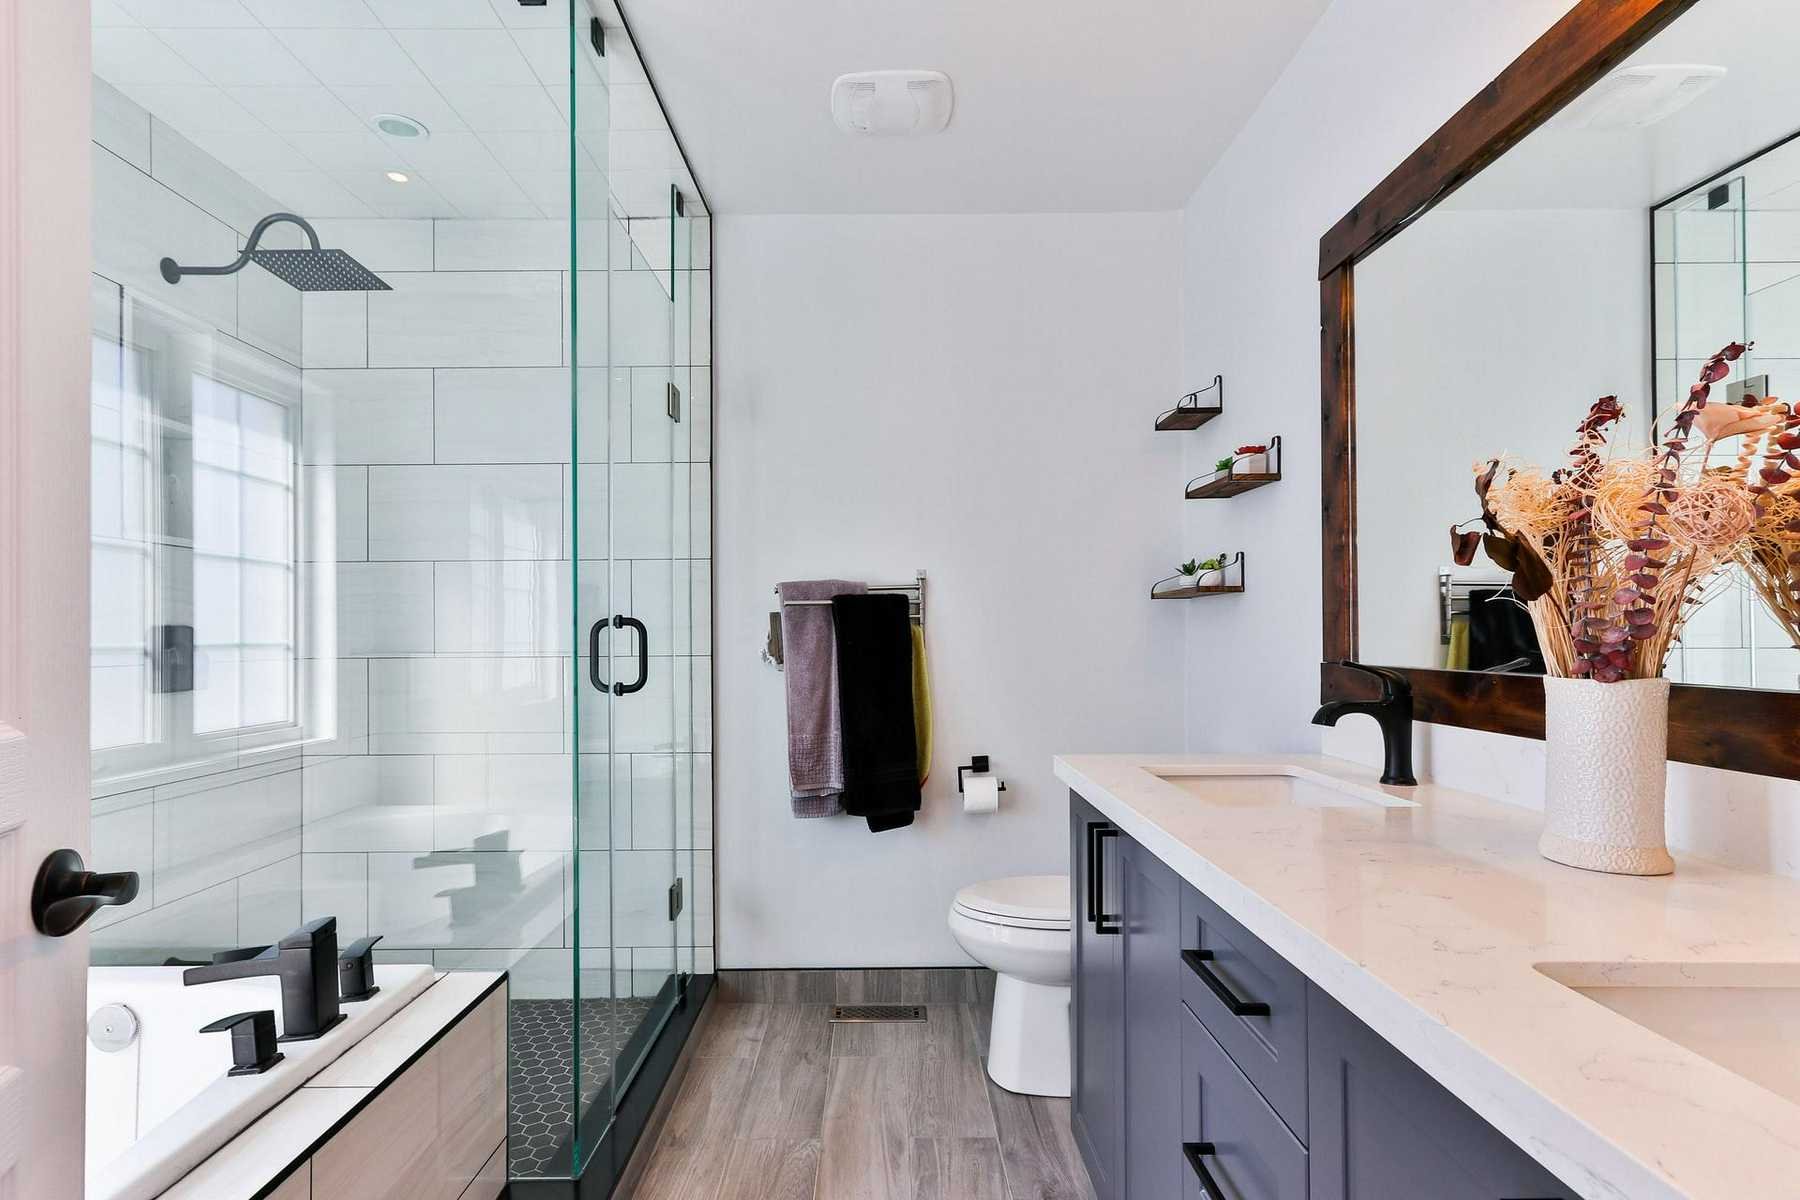 Bathroom cabinet ideas: 10 smart cupboards and cabinets